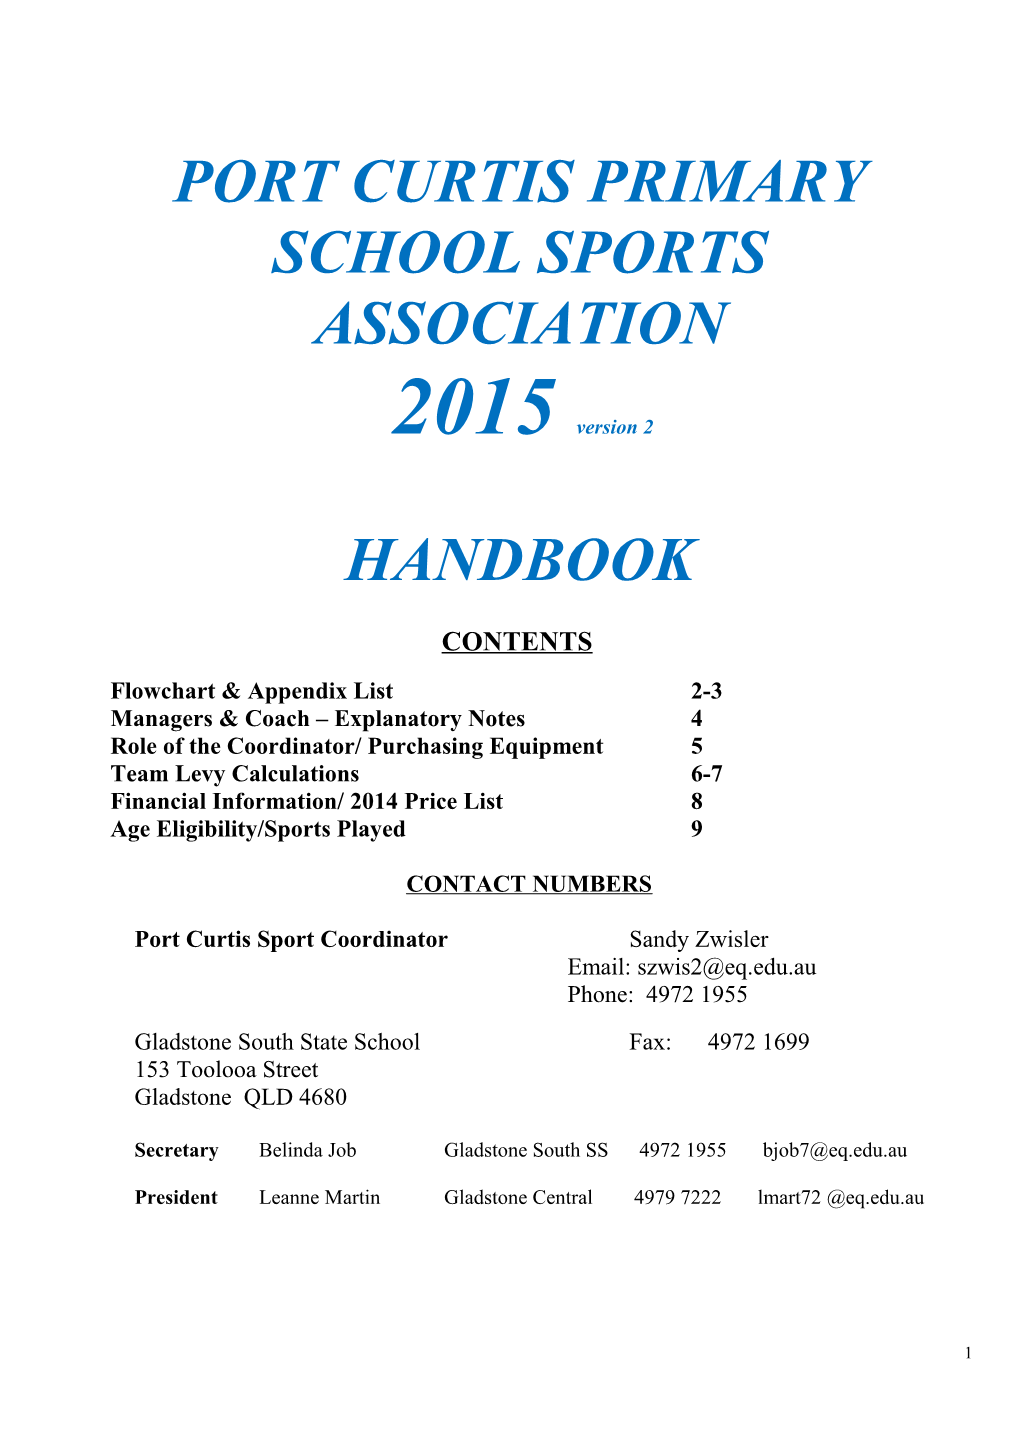 Coaches and Managers Handbook 2015